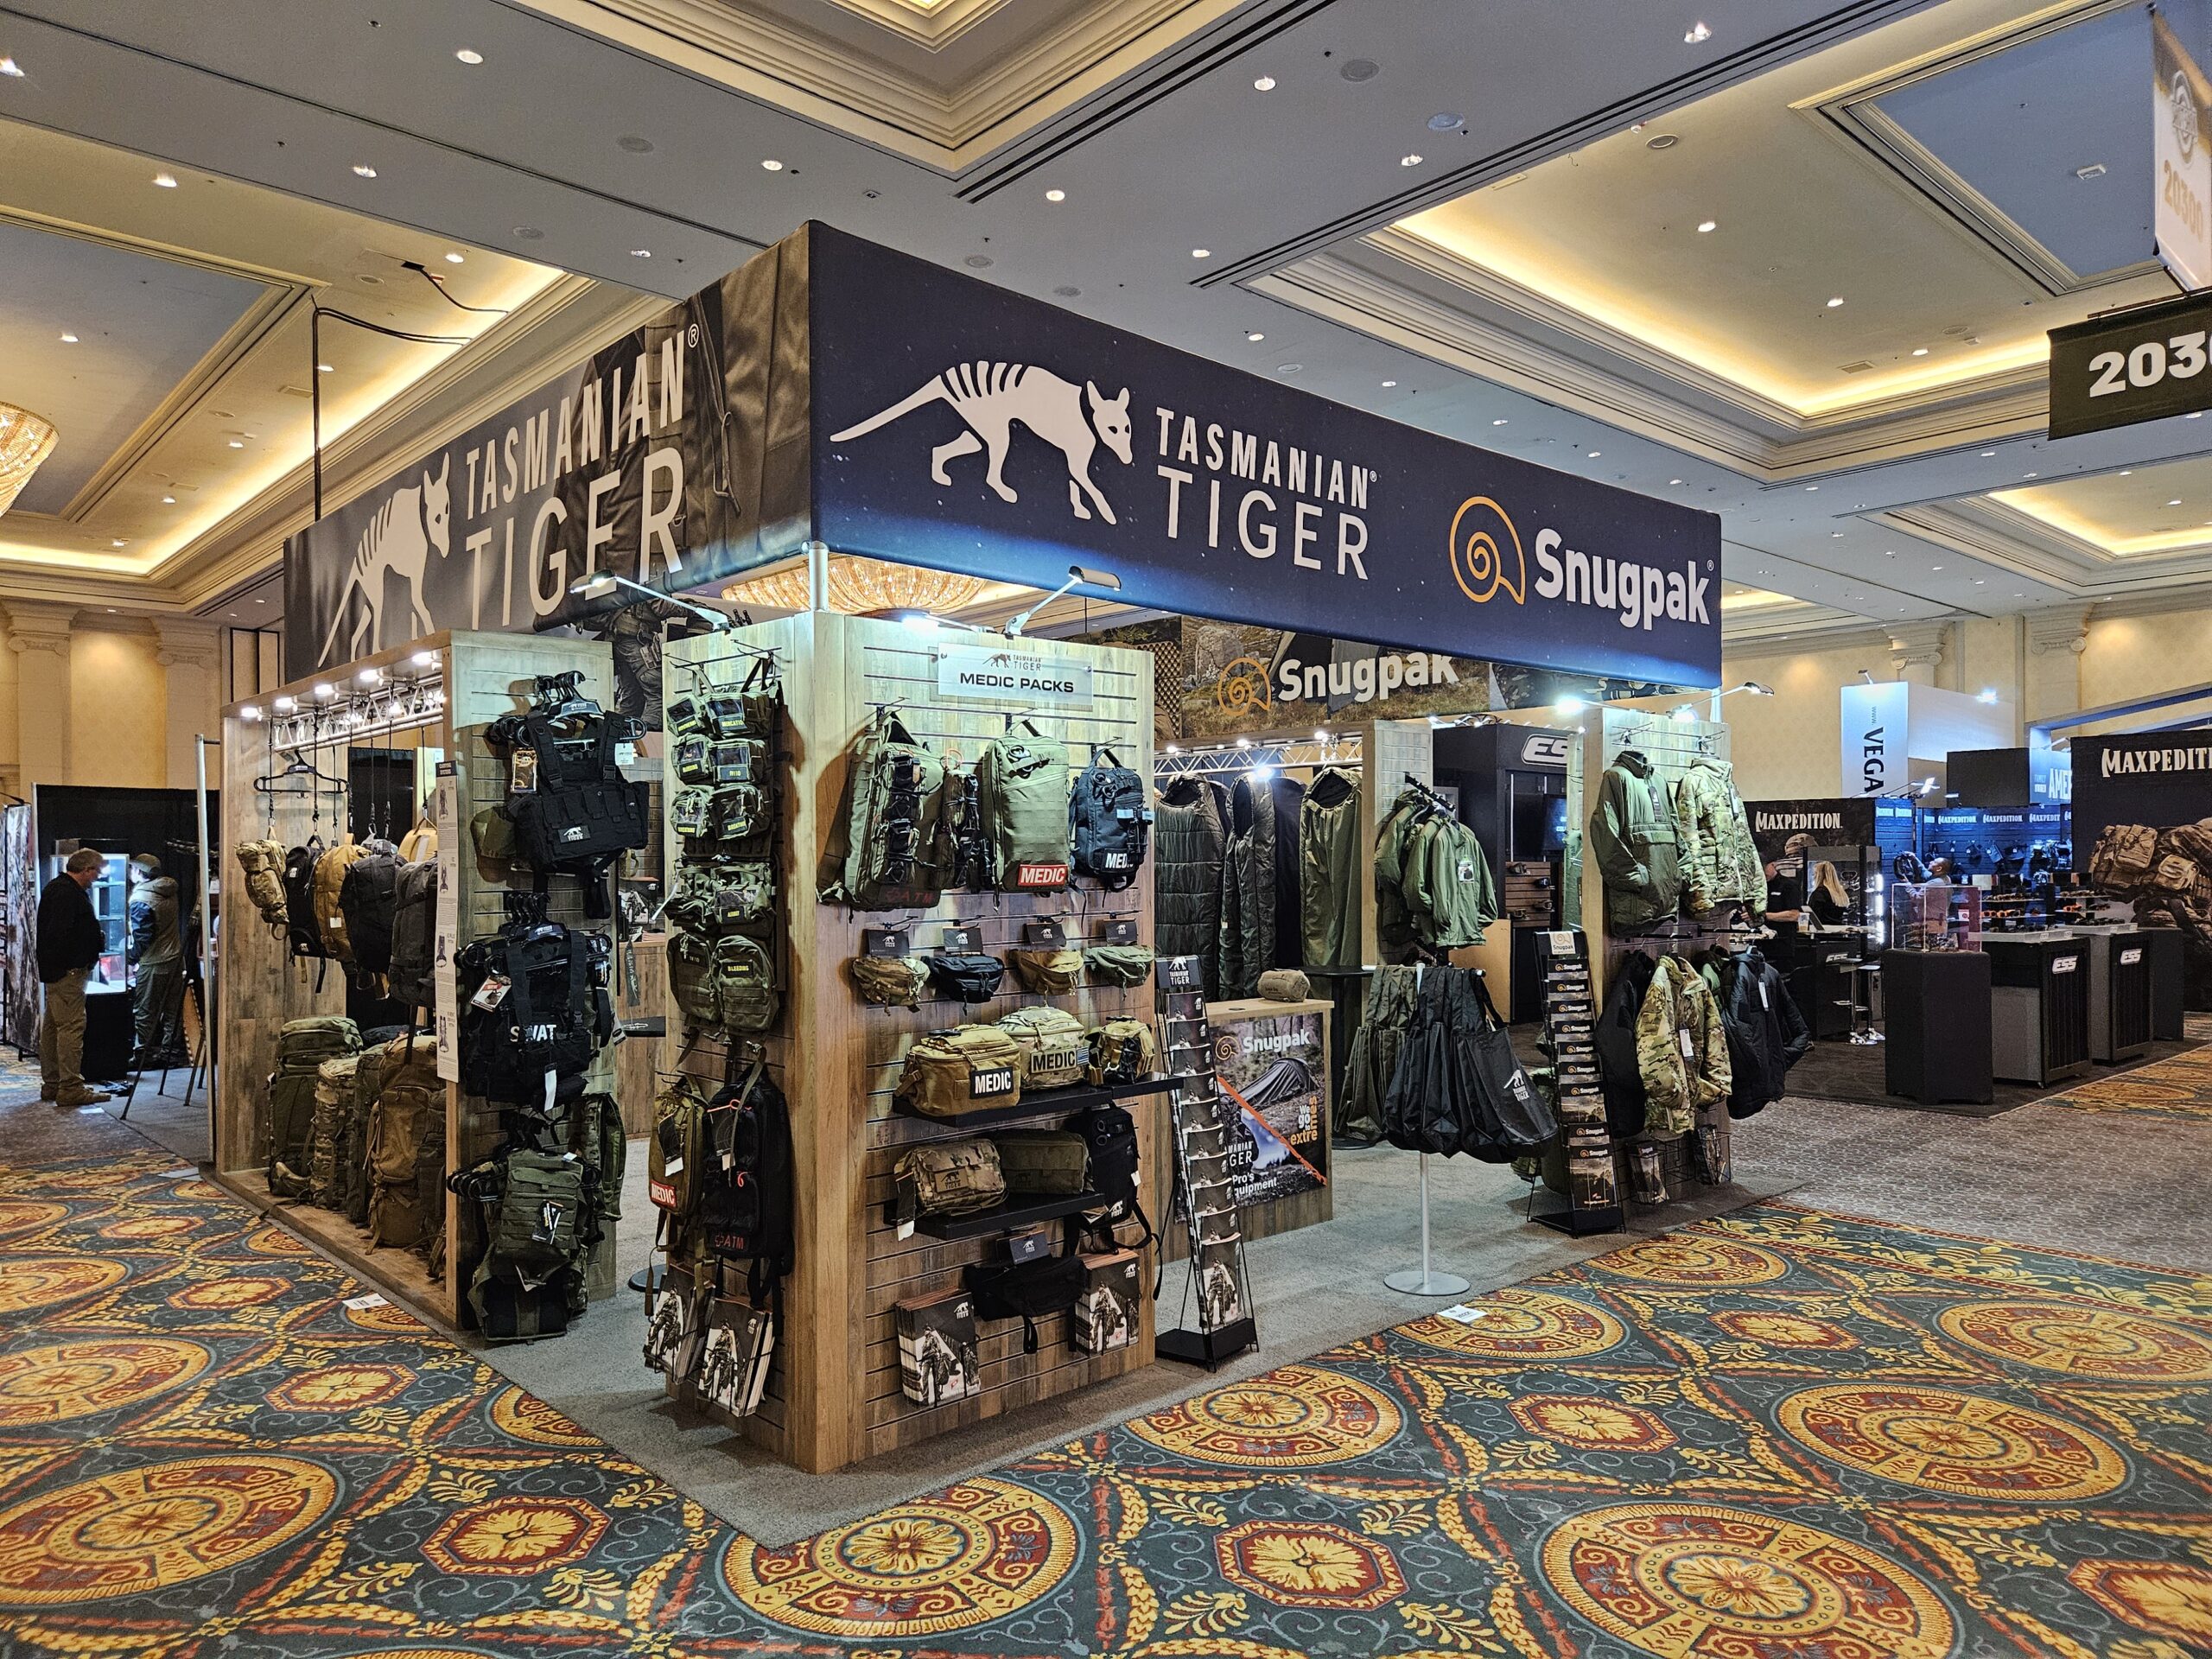 THE TASMANIAN TIGER® SHOT SHOW BOOTH WAS WELL ATTENDED BY CUSTOMERS AND SAW AN INCREASE IN ORDERS.